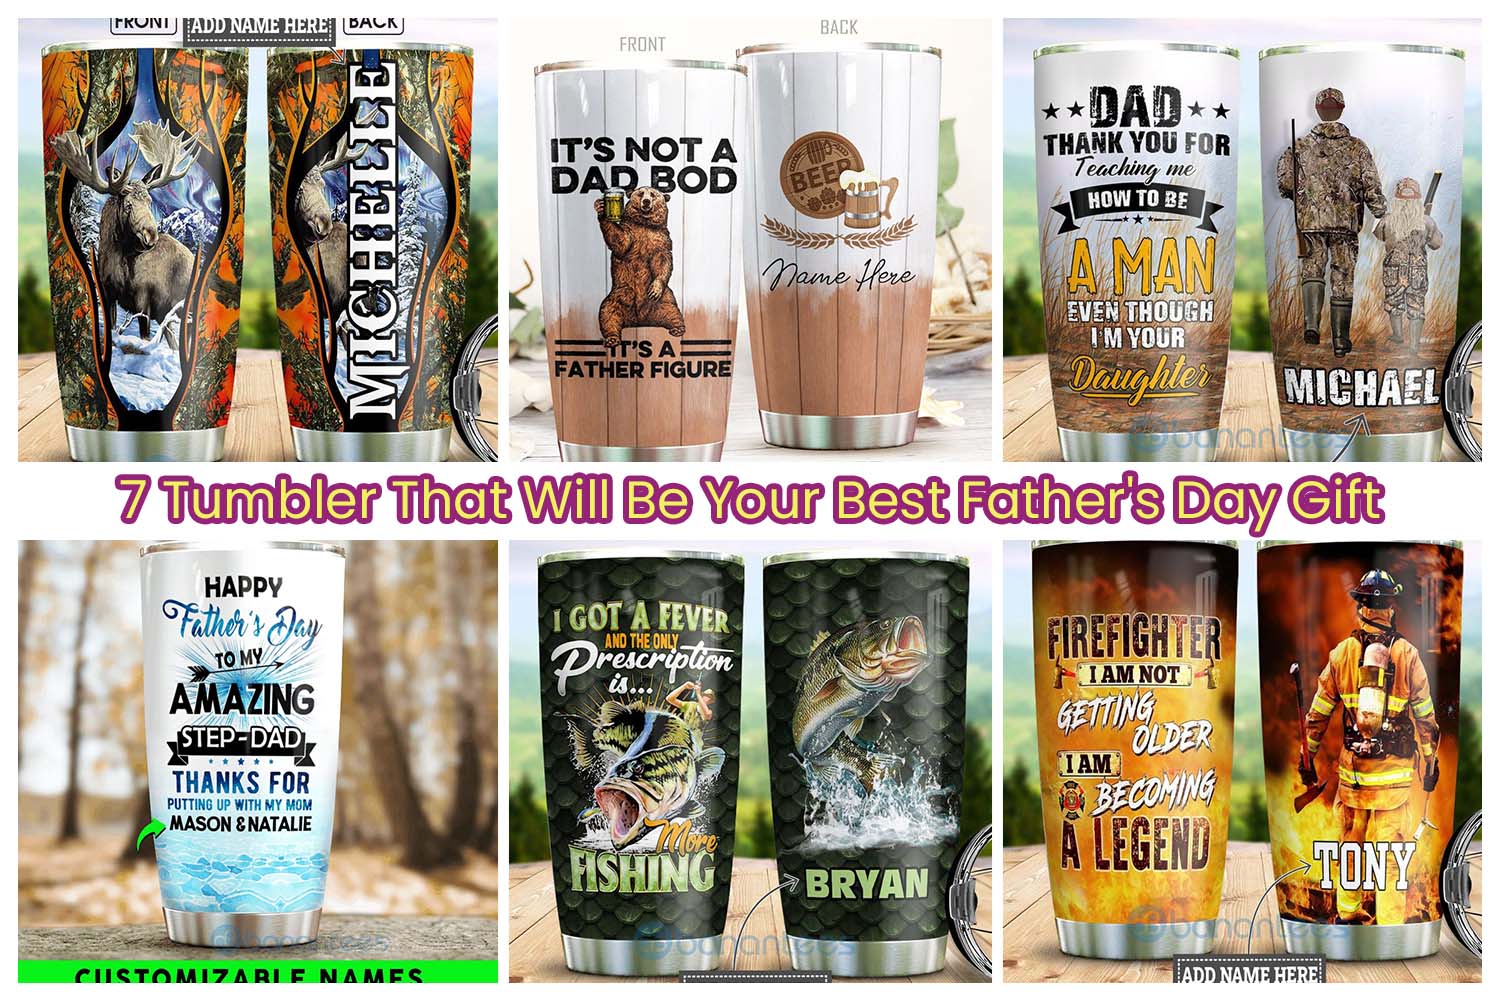 7 Tumbler That Will Be Your Best Father's Day Gift